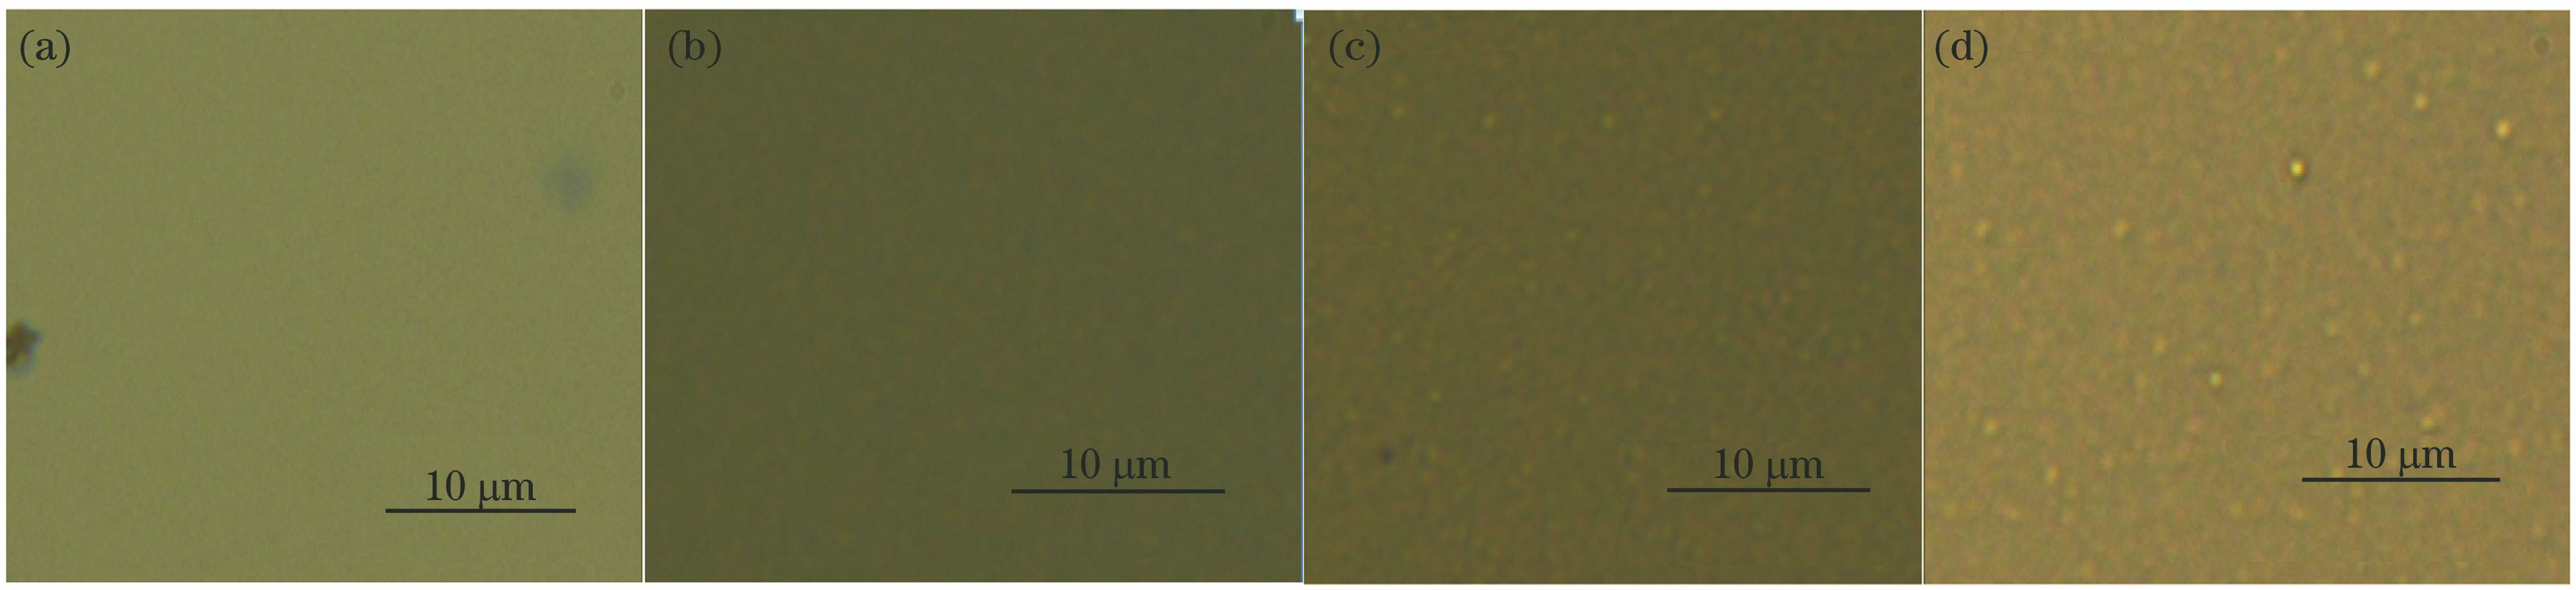 Optical micrographs with the gold film thickness of (a) 3 nm, (b) 6 nm, (c) 8 nm, (d) 10 nm, while the annealing temperature is 570 ℃ and the annealing time is 210 s